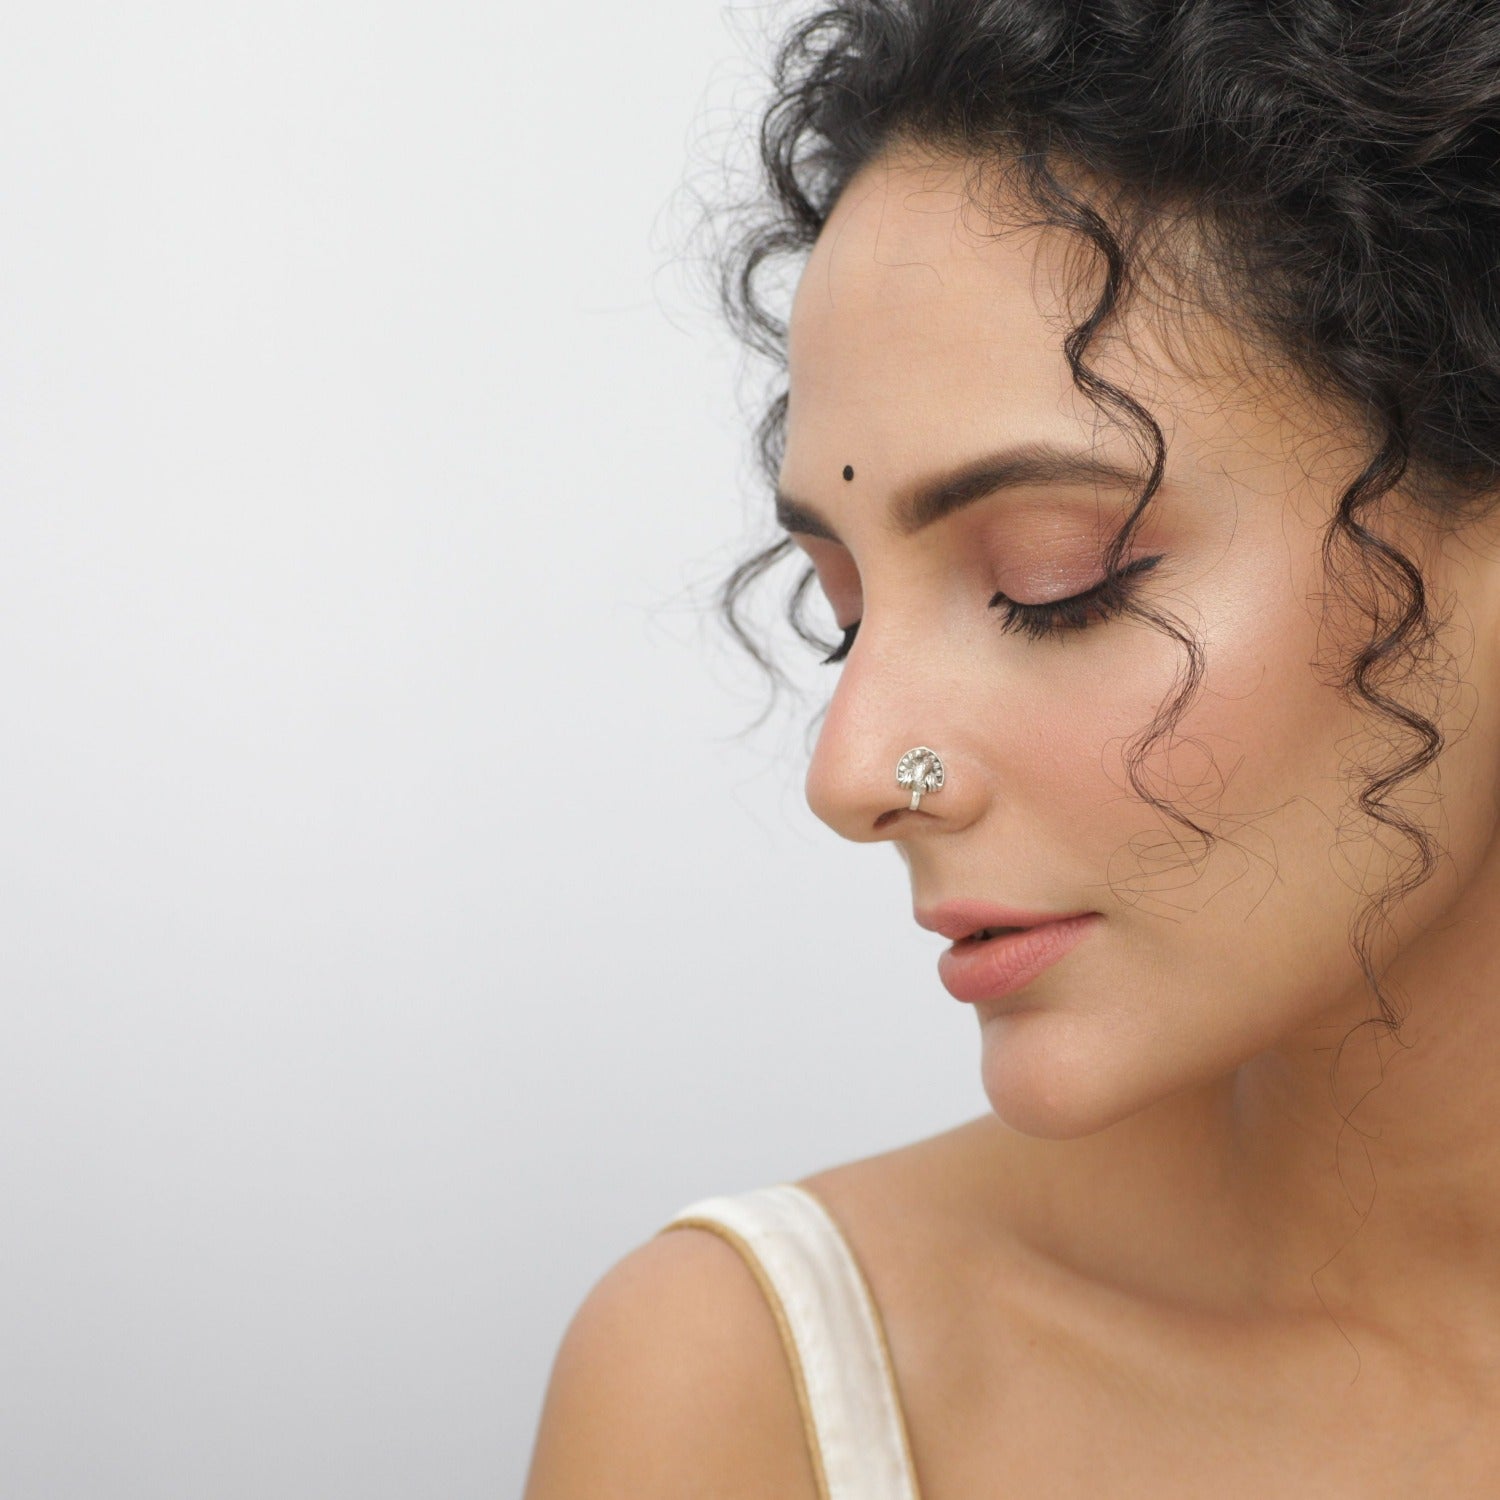 Fashion Nose Ring Online Shopping for Women at Low Prices